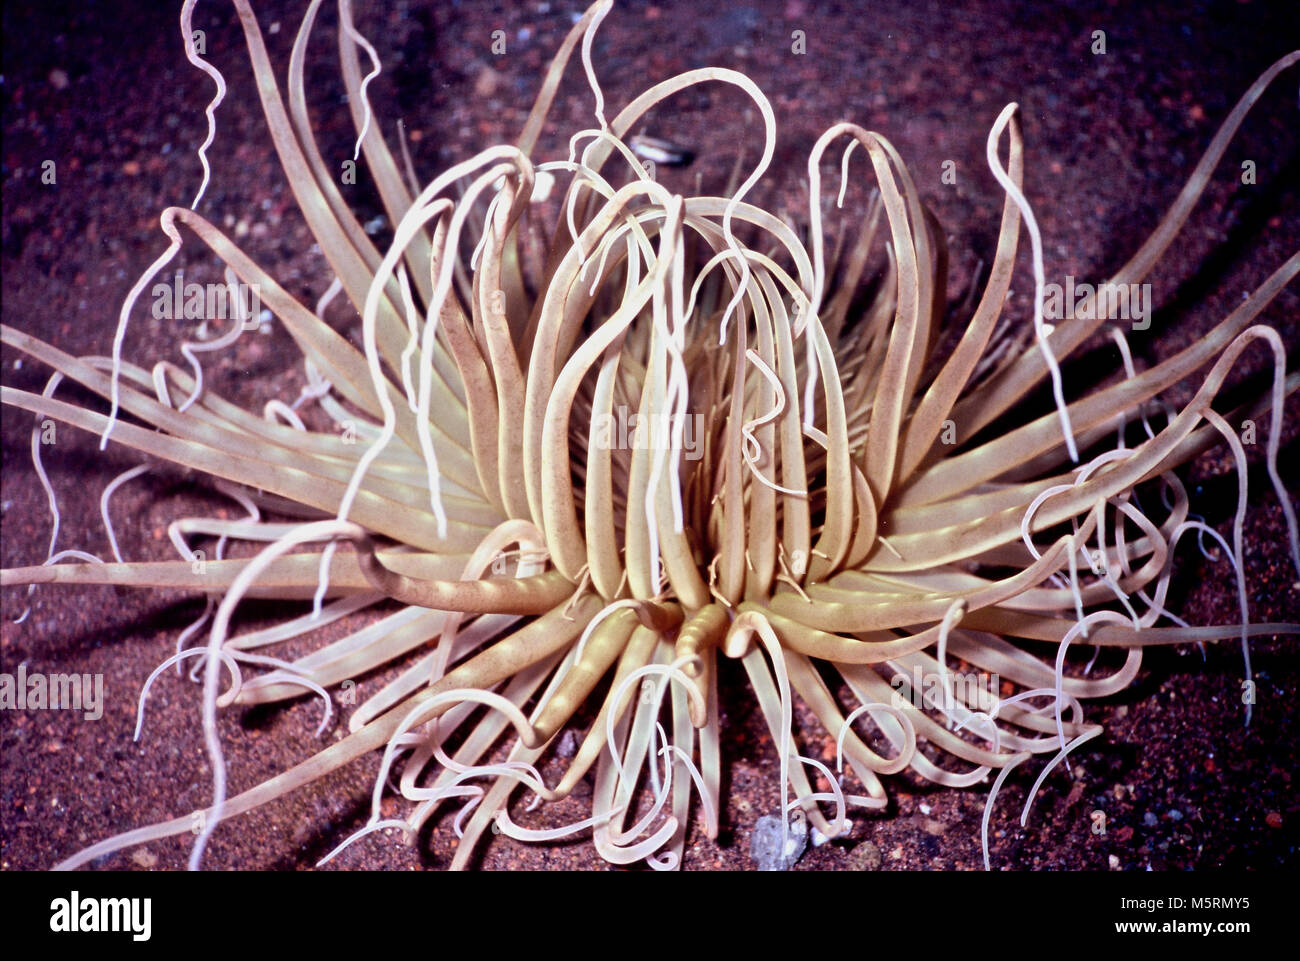 Macrodactyla doreensis (diameter 30 cms.) has a smaller number of tentacles than most sea anemones. The common names are long tentacle anemone and corkscrew anemone. Each tentacle is similar in size, shape and colour. They tend to taper towards the end and some have a twisted appearance (hence 'corkscrew'). In this instance, the animal is light brown - other individuals display different colours, including pink and blue. It lives on sandy substrates, where it catches zooplankton in the current, which it transfers to the central mouth. If alarmed, it buries itself in the sand. Bali, Indonesia. Stock Photo